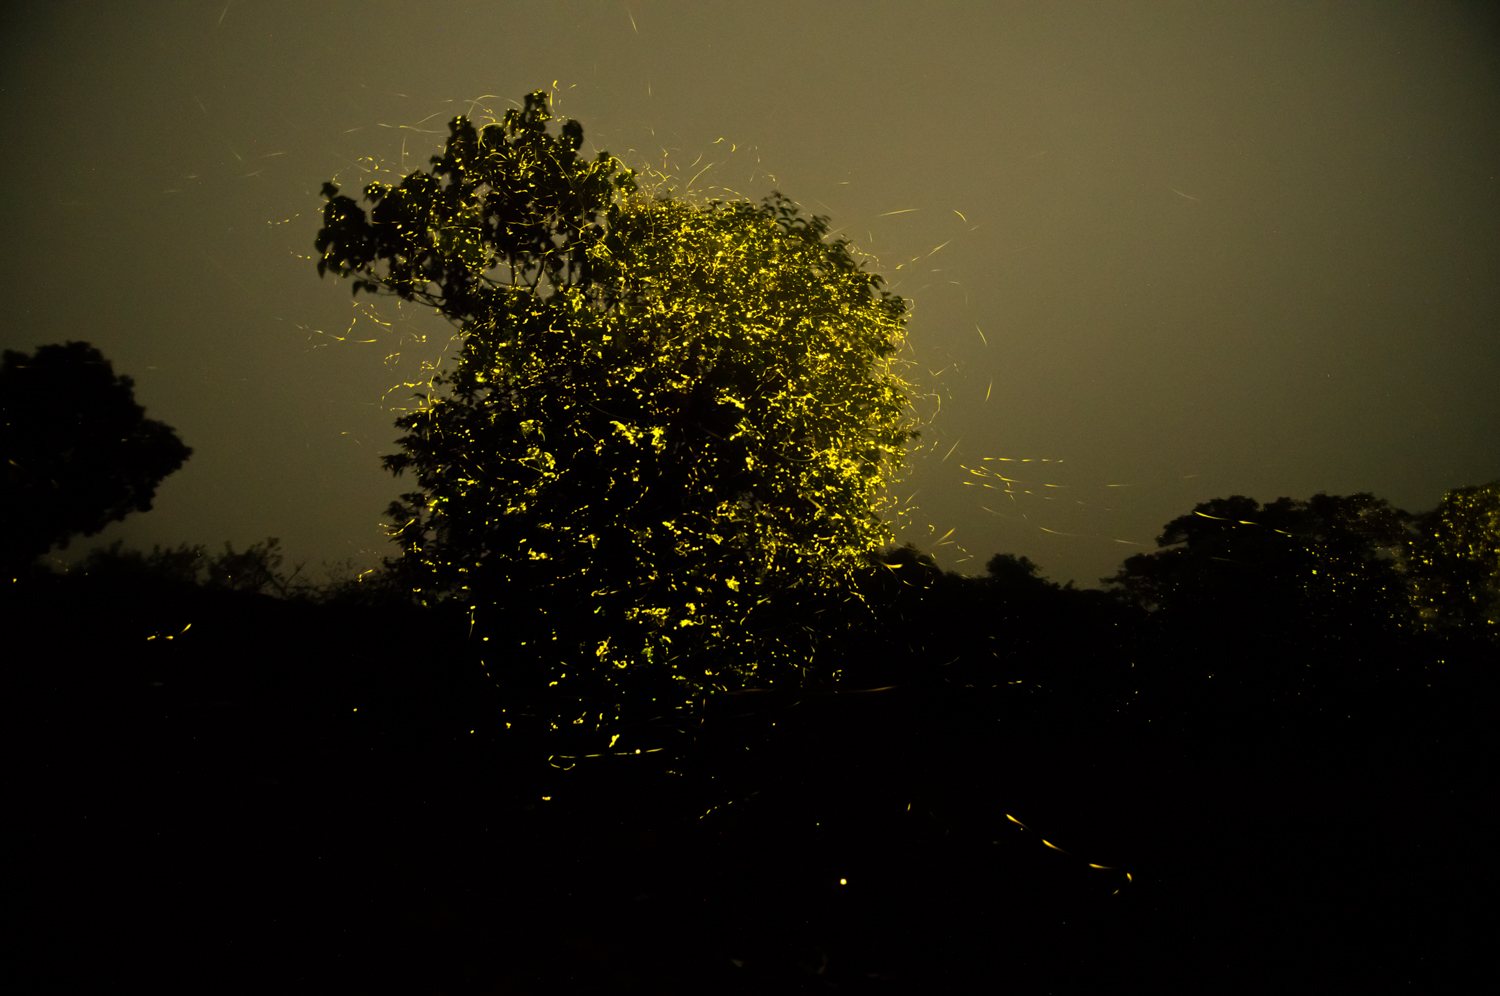  As hot days turn into cool nights, summers make way for monsoon. Fireflies signify the onset of the rains. Before the season of plenty, these beetles use bio-luminescence to call out to potential mates. 